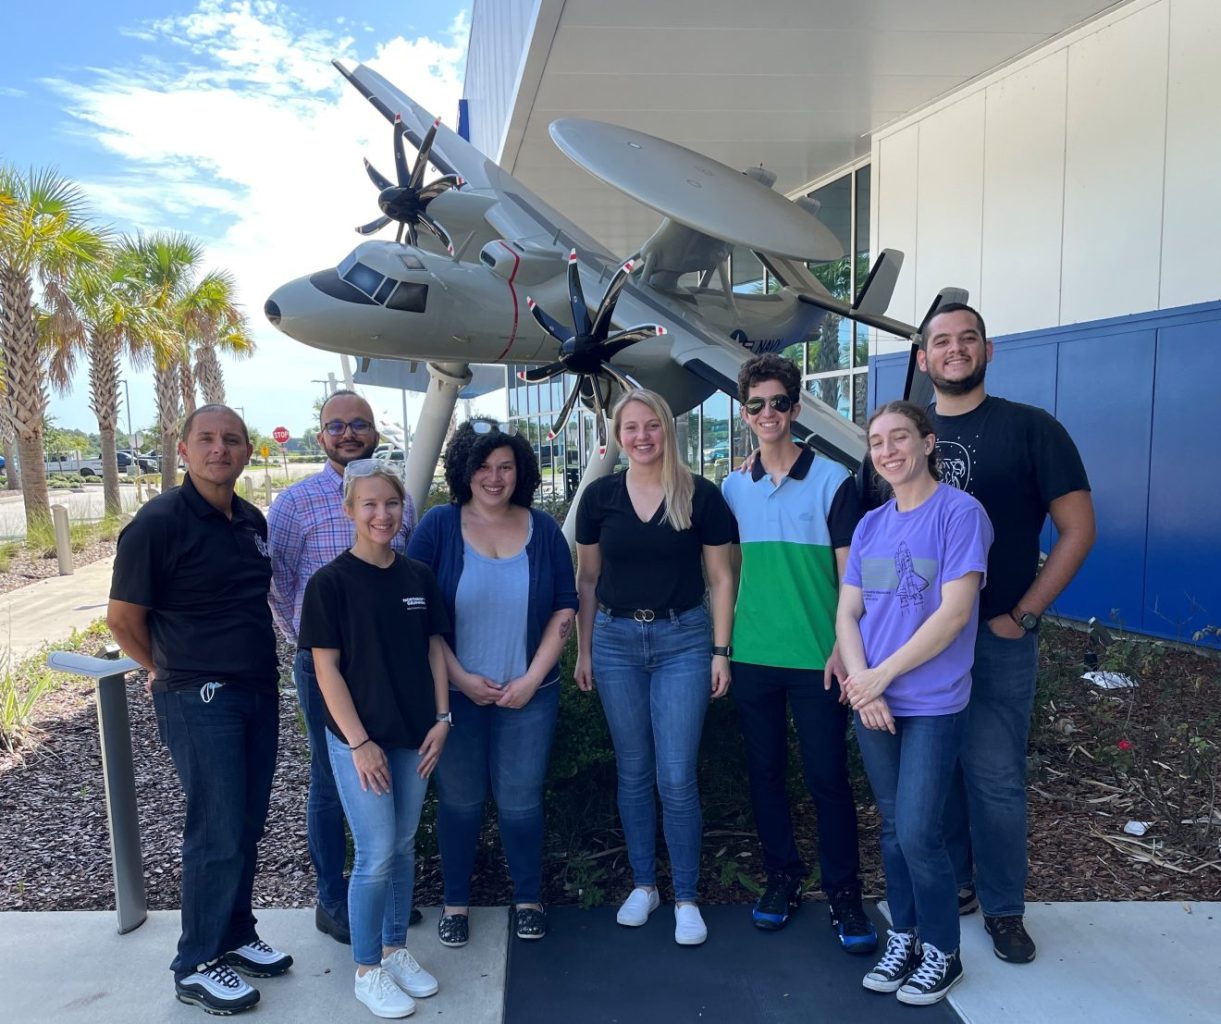 Andy Traficante, third from the right, is a Florida Tech graduate who is now pursuing a master's in the flight test engineering program.